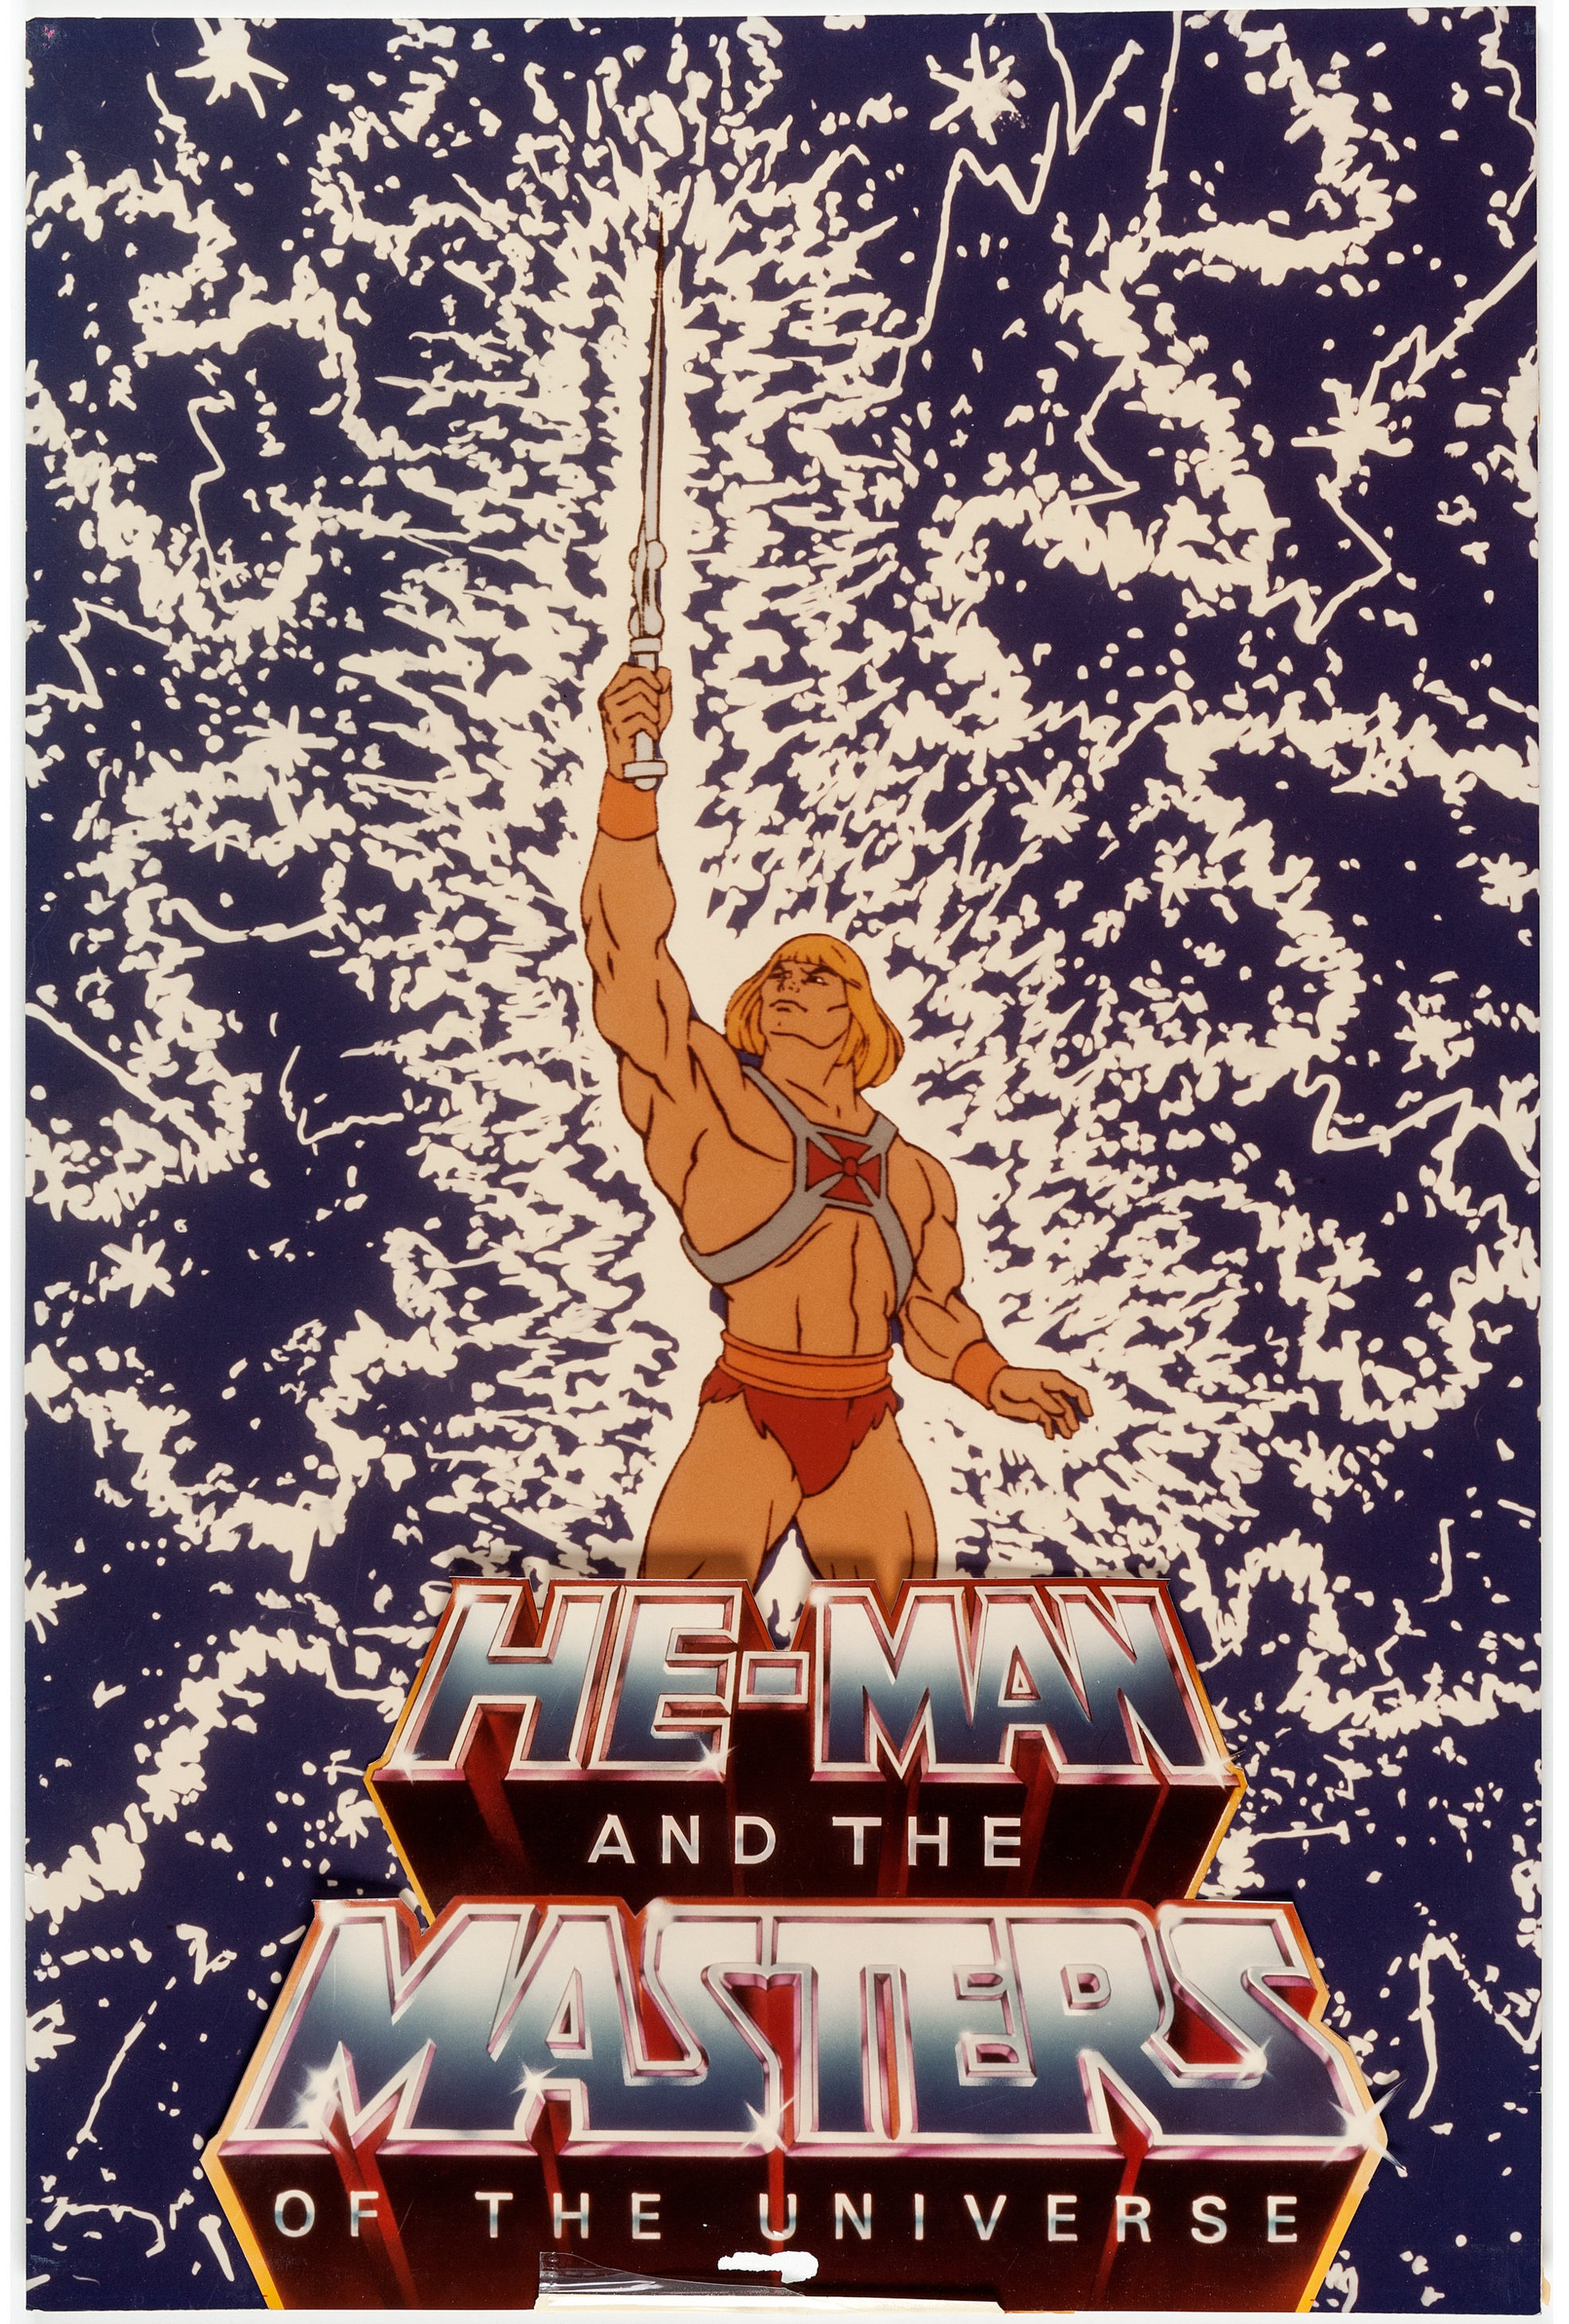 He-Man Master of the Universe (1983) poster